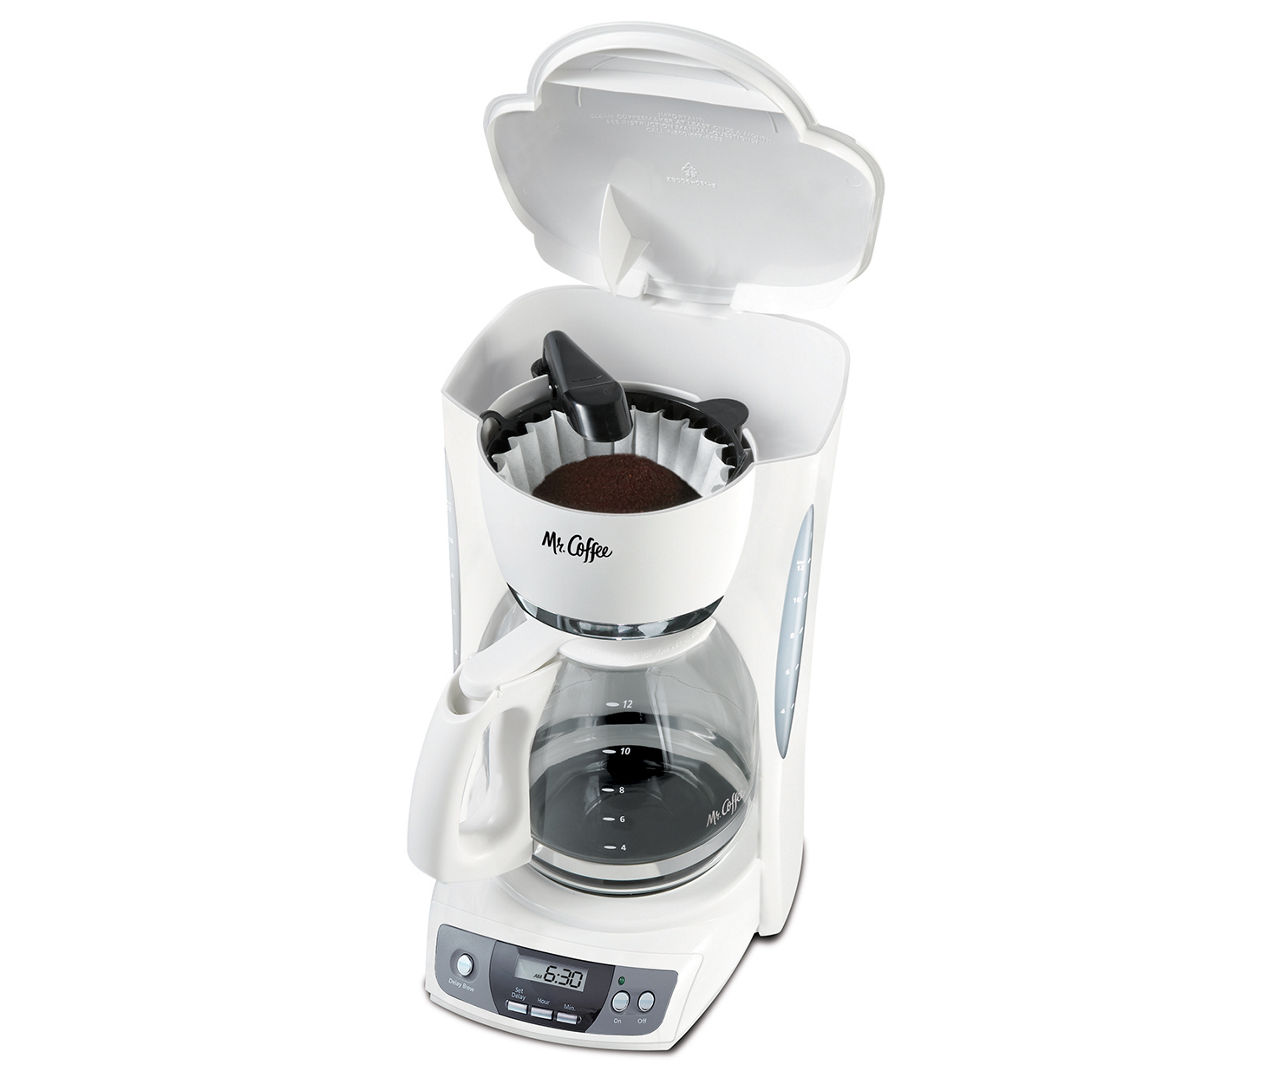 Mr. Coffee 4-Cup White Switch Coffeemaker